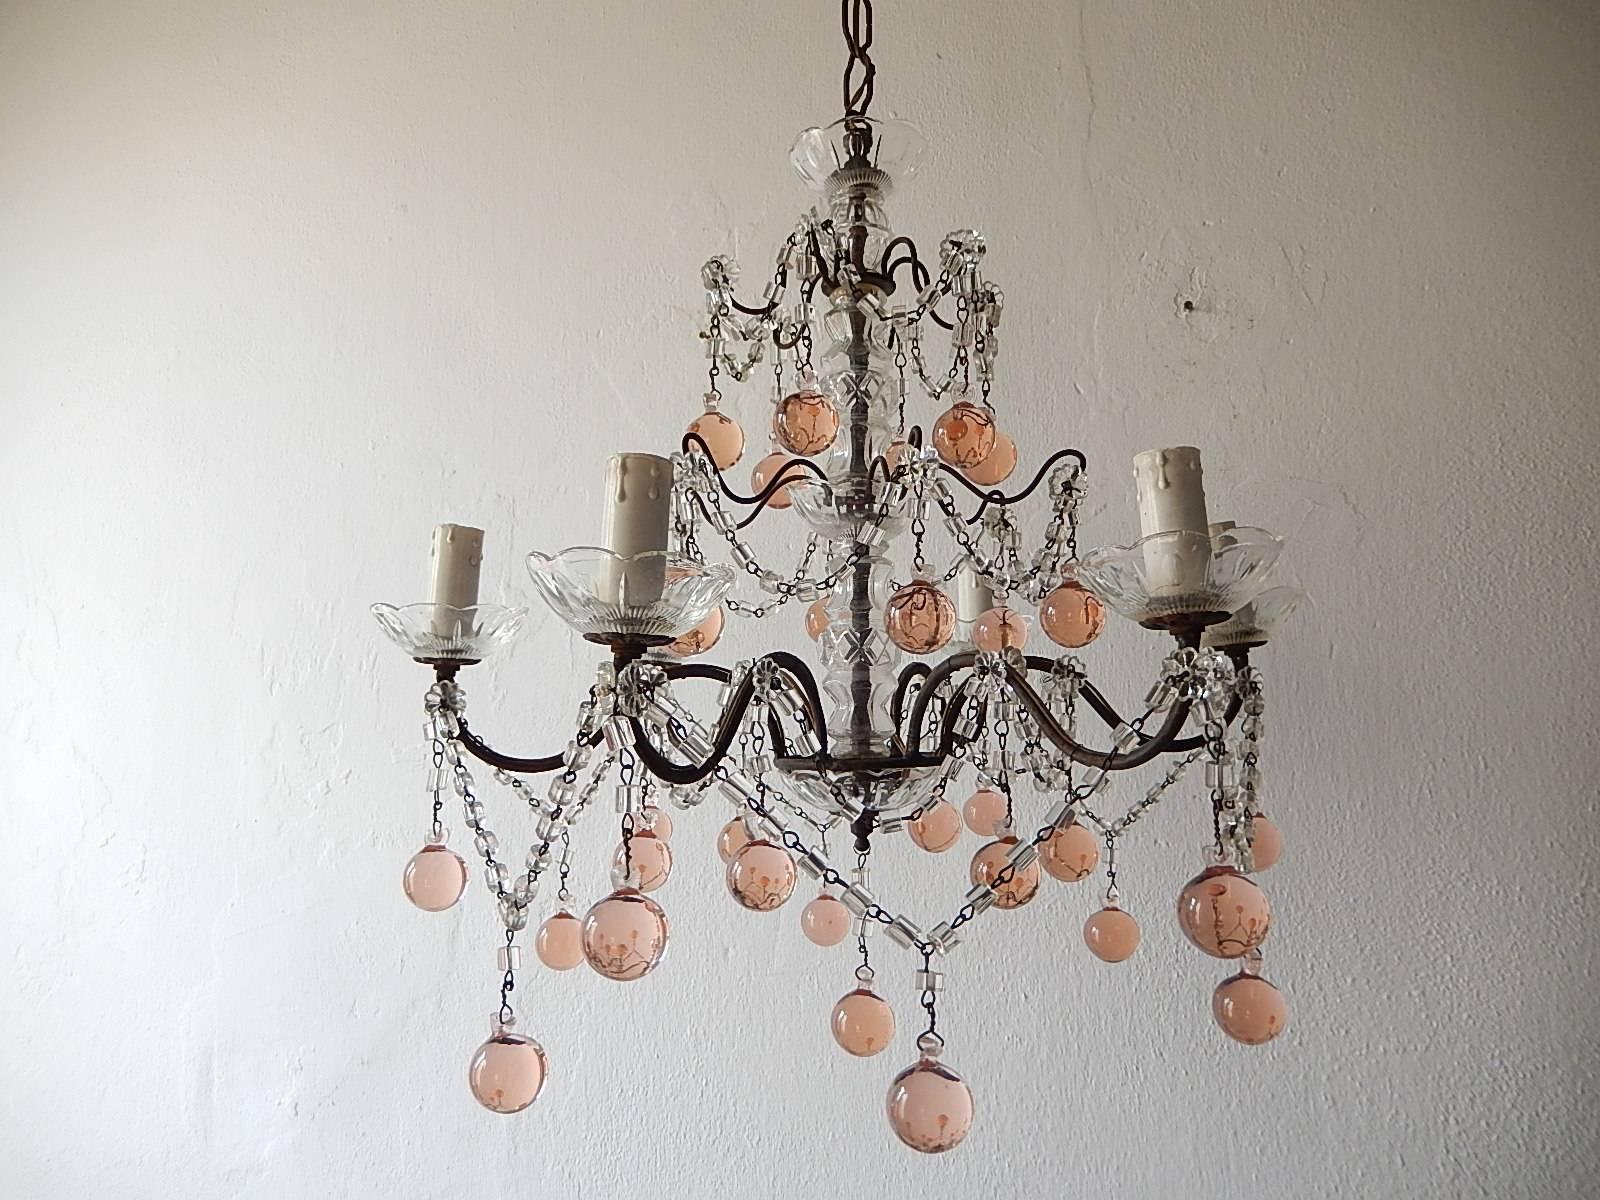 Housing six lights sitting in crystal bobèche. Will be rewired with certified US UL sockets for USA and appropriate sockets for all other countries and ready to hang. Metal with glass florets and macaroni beading swags throughout. Rare pink Murano